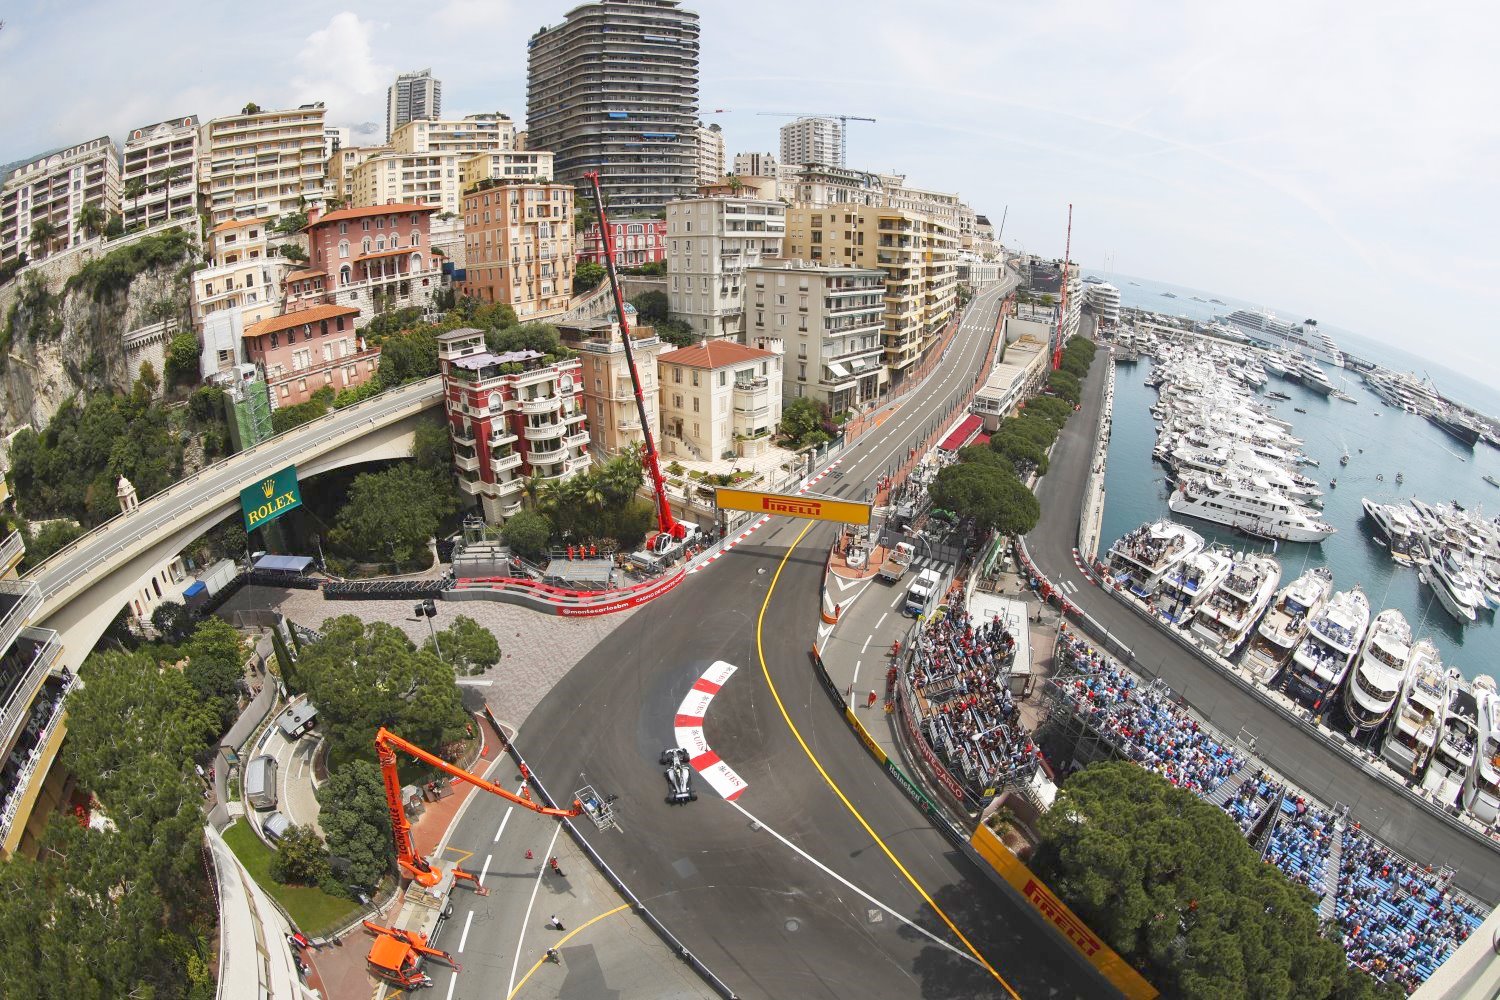 It is simply too difficult to reschedule a street race like Monaco